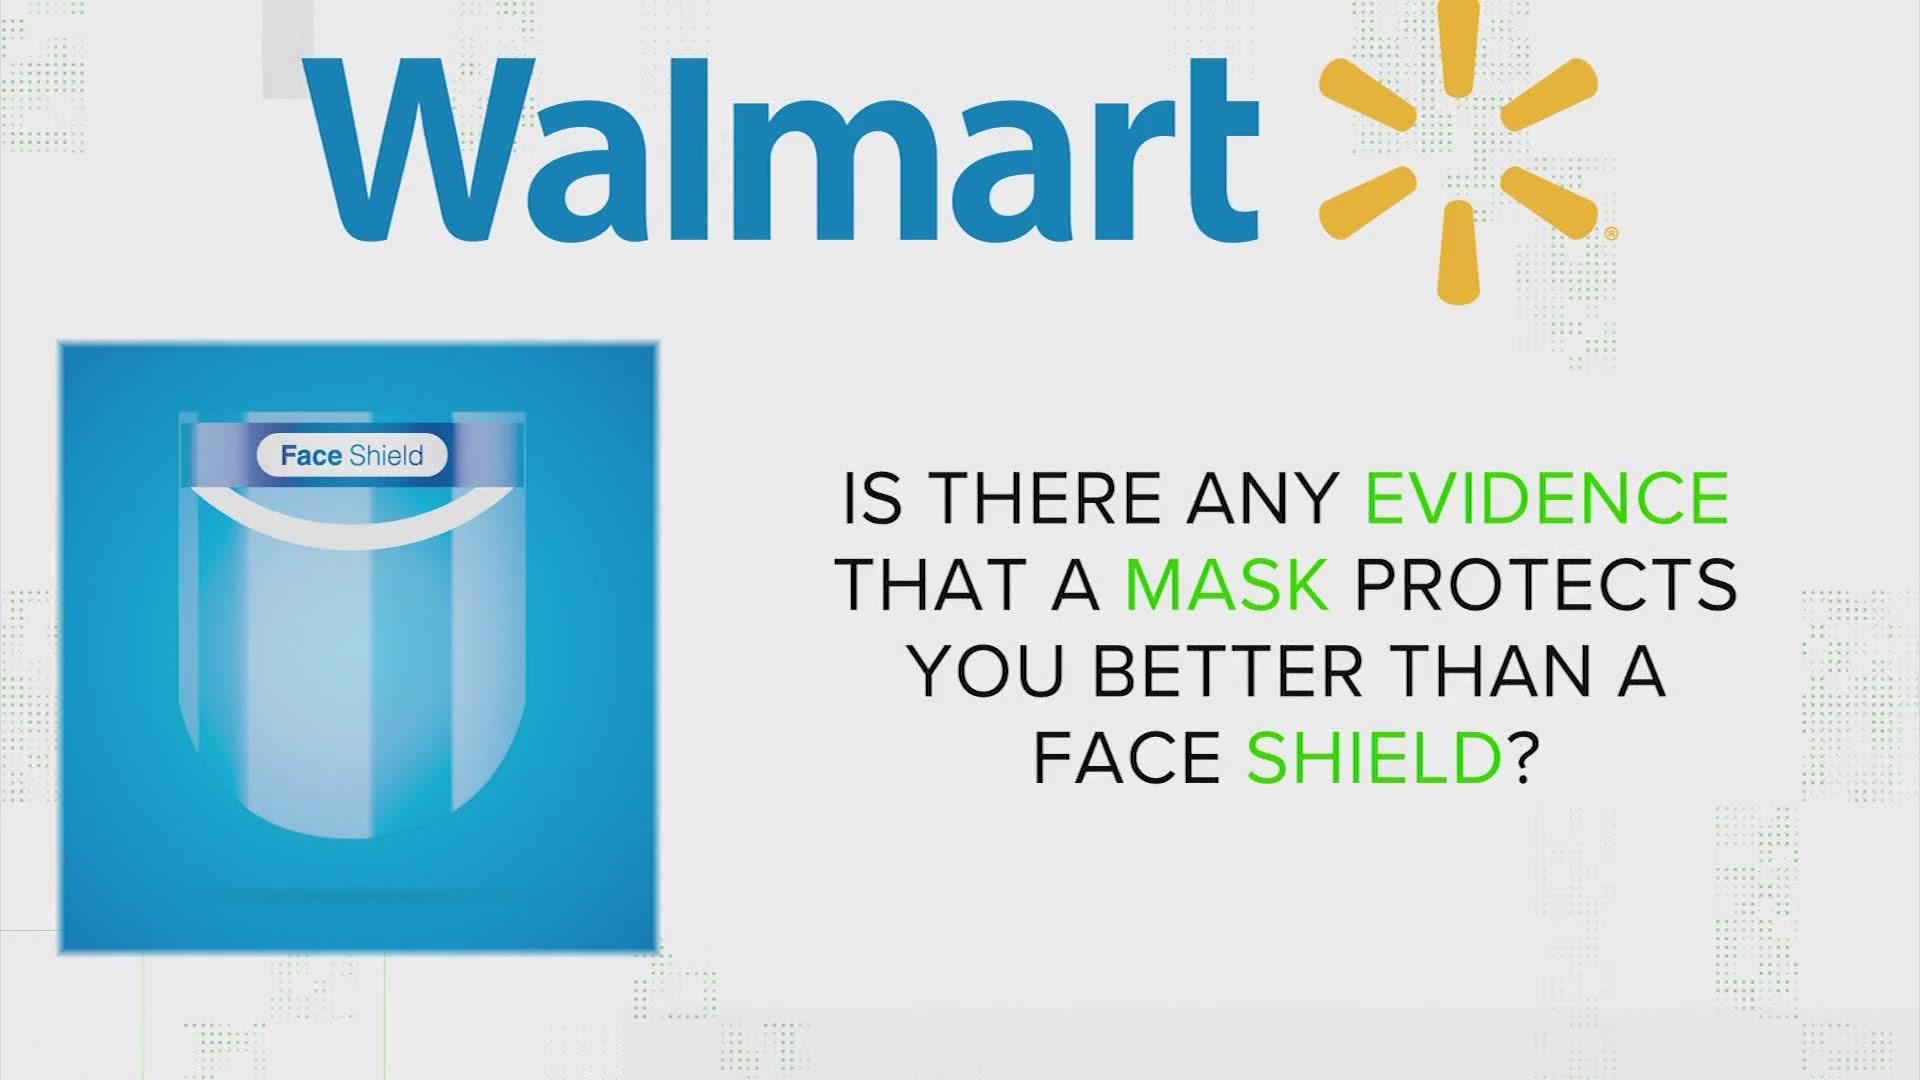 A viewer who walked into Walmart and was told she had to leave because she was wearing a face shield wanted to know if cloth masks protect you more than face shields